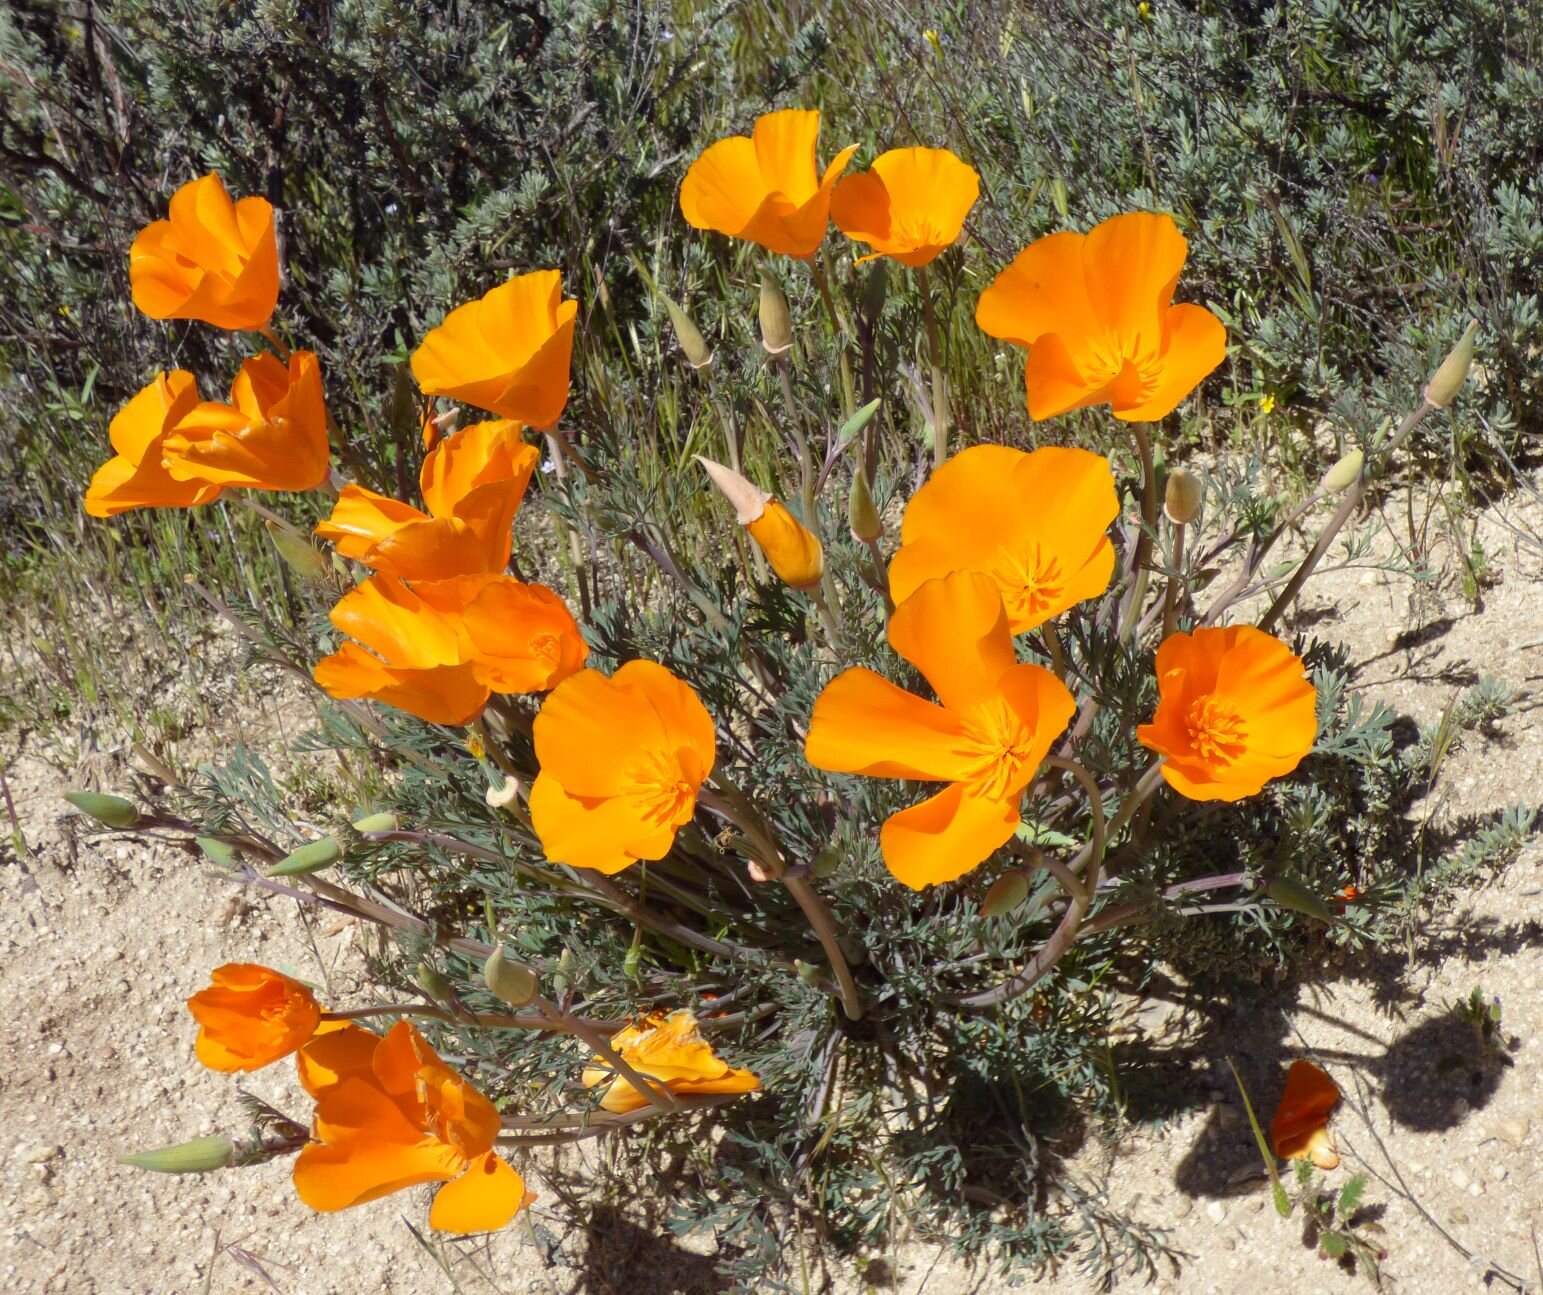 but with more poppies than usual (Eschscholzia californica).